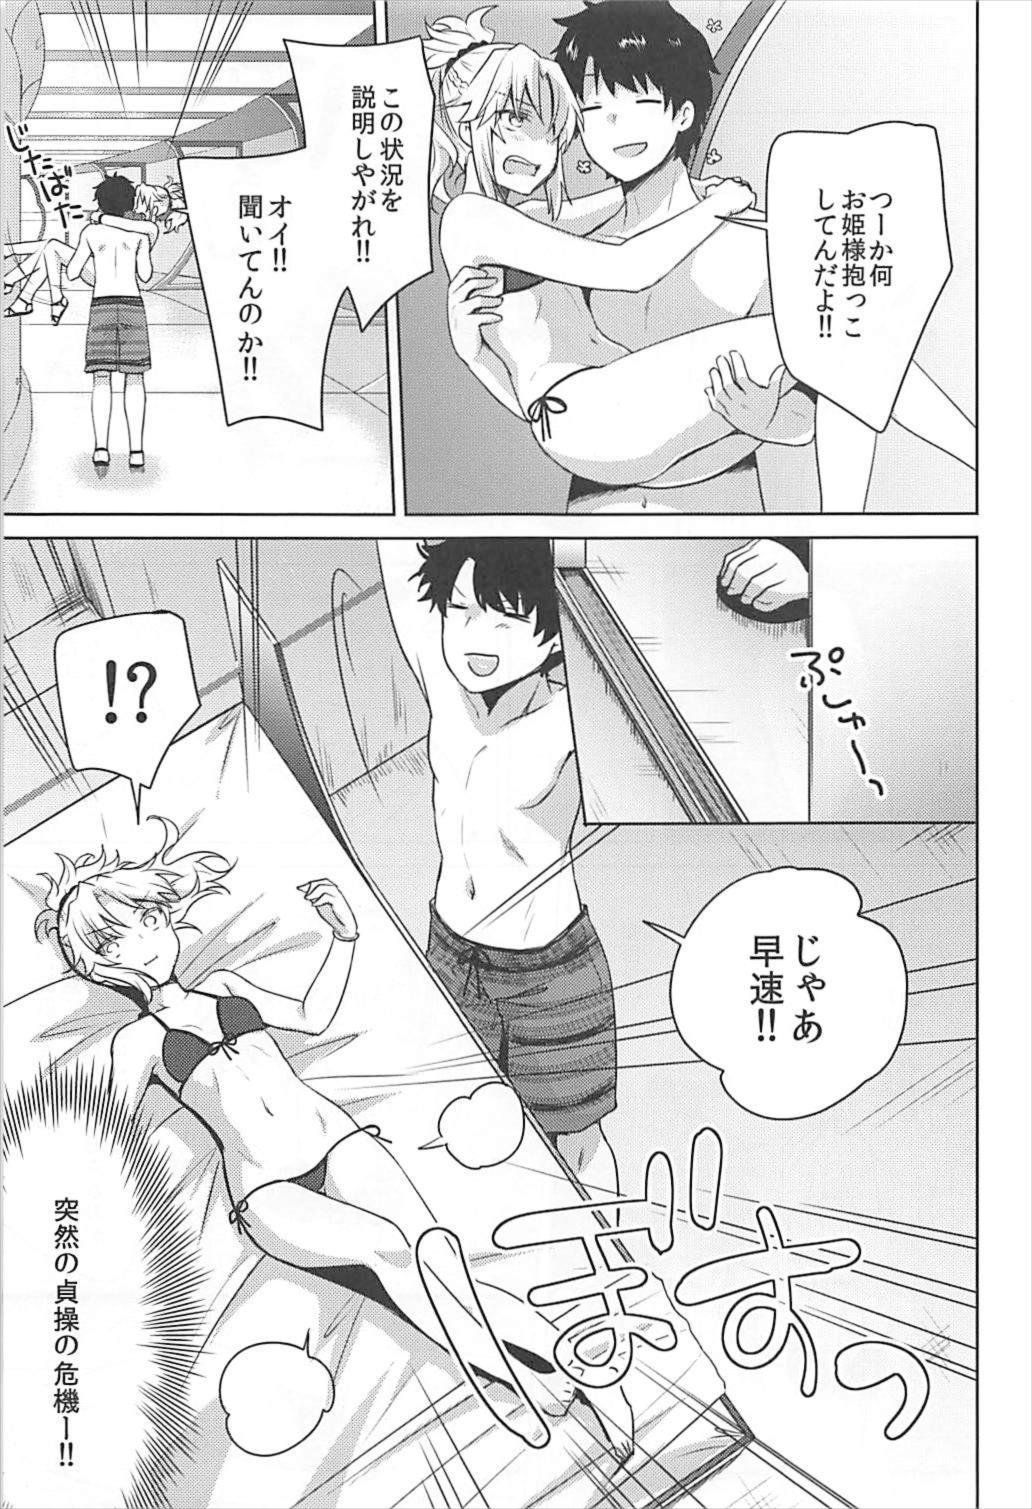 With bones - Fate grand order Old Vs Young - Page 4